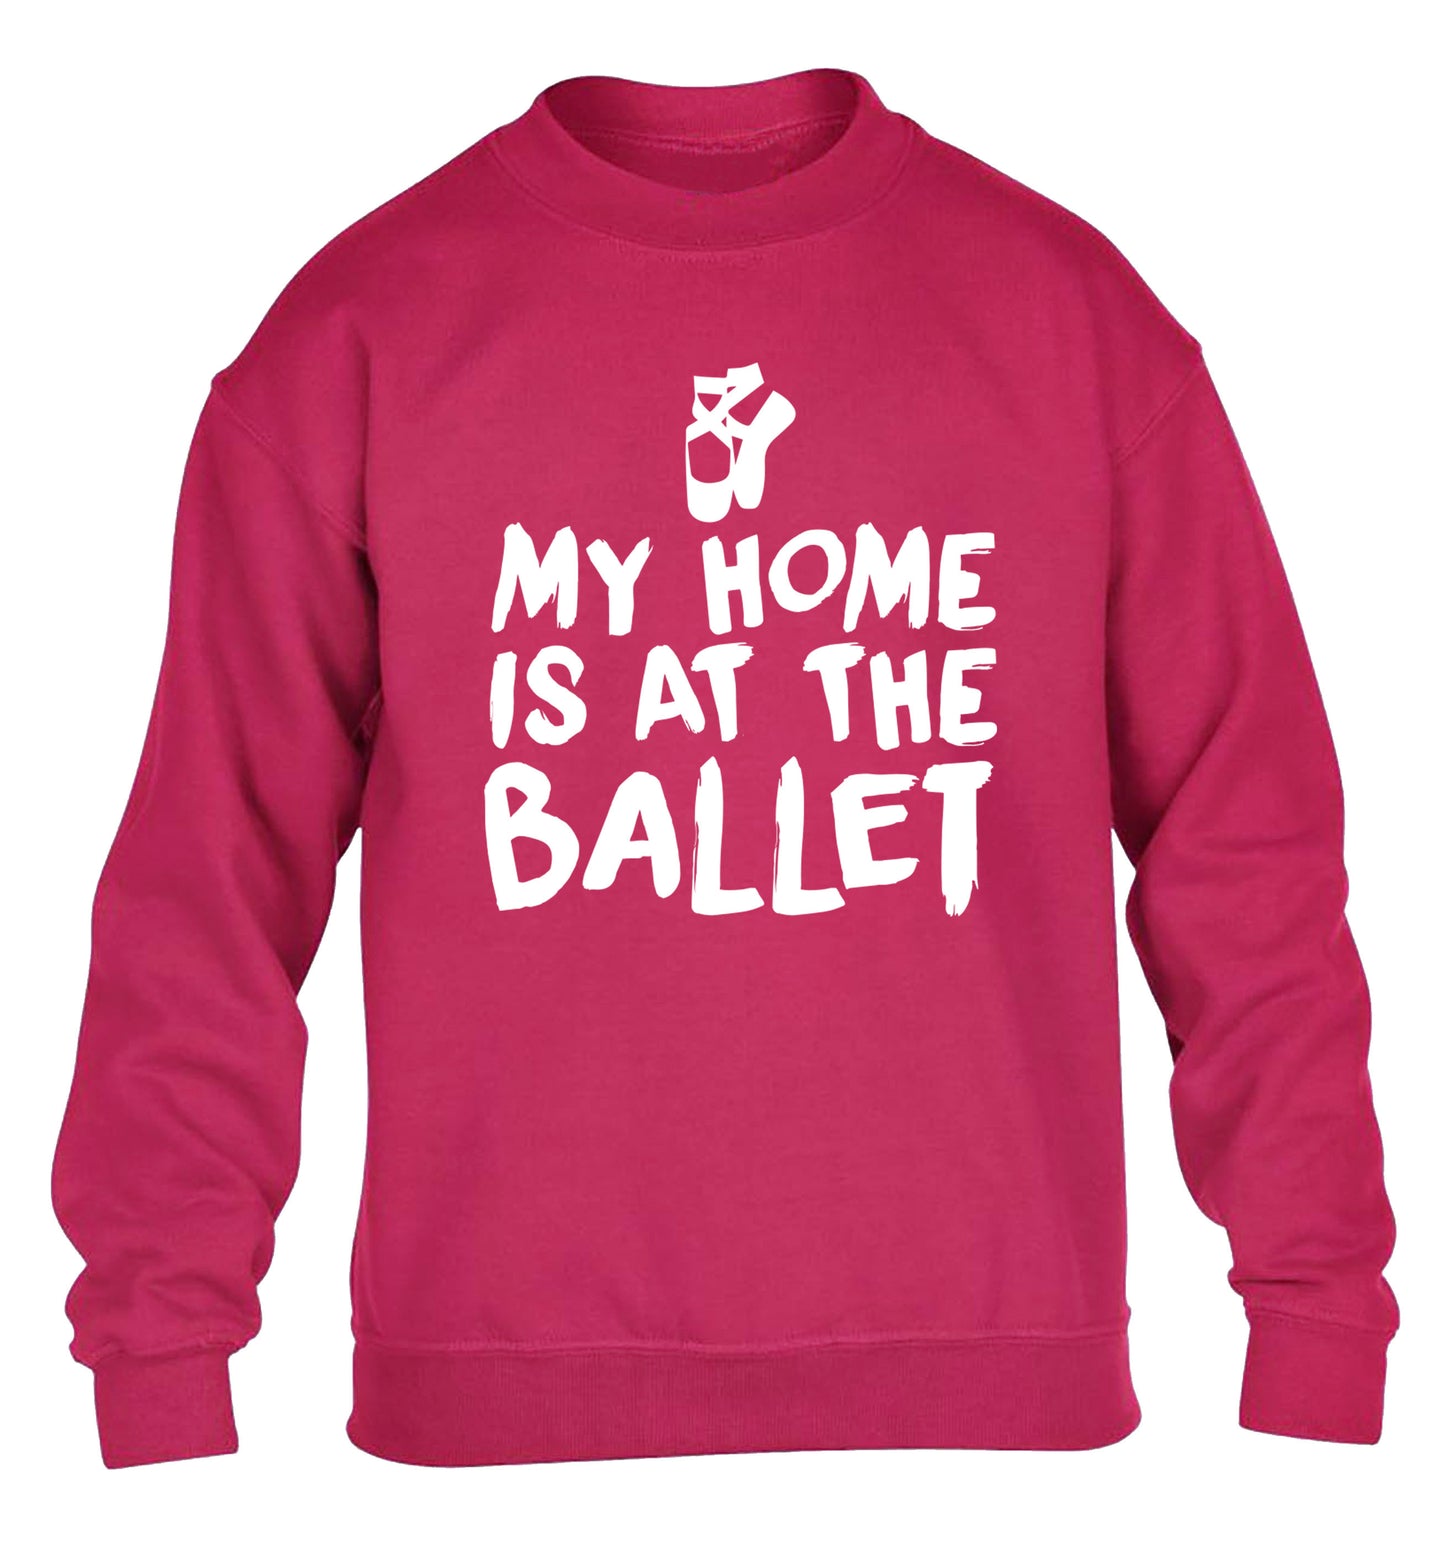 My home is at the dance studio children's pink sweater 12-14 Years